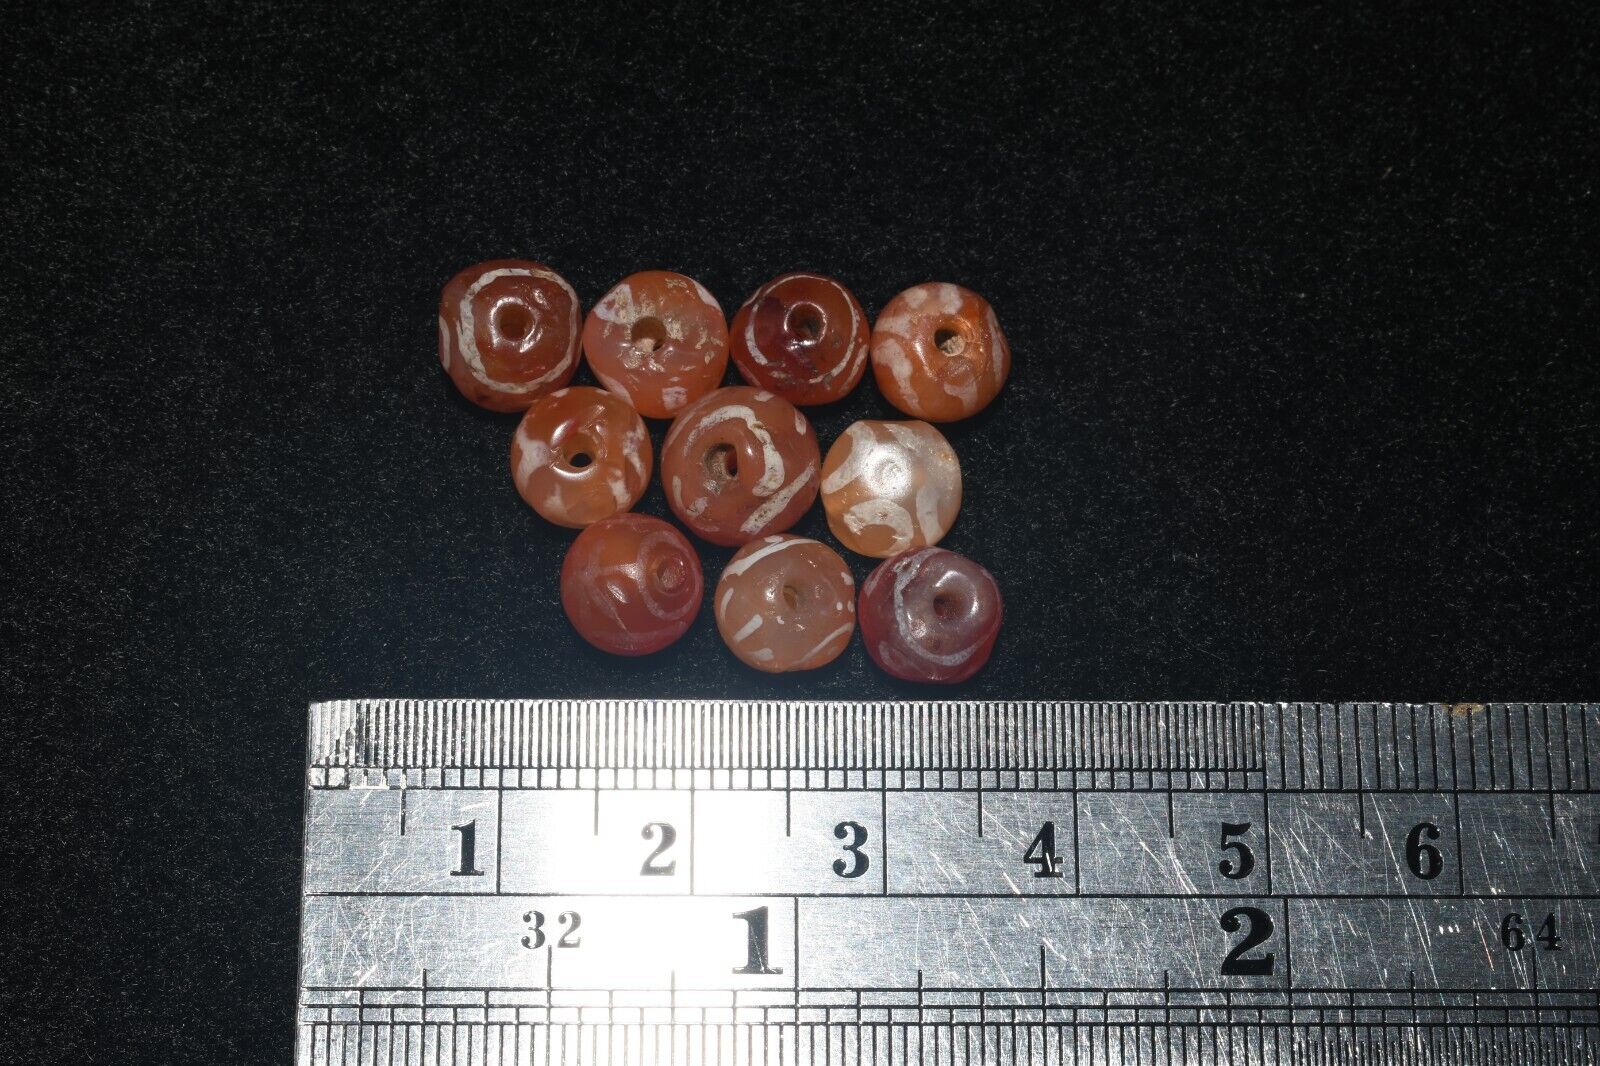 Authentic 10 Ancient Indus Valley Etched Round Carnelian Beads Ca. 2600-1700 BCE Без бренда - фотография #7